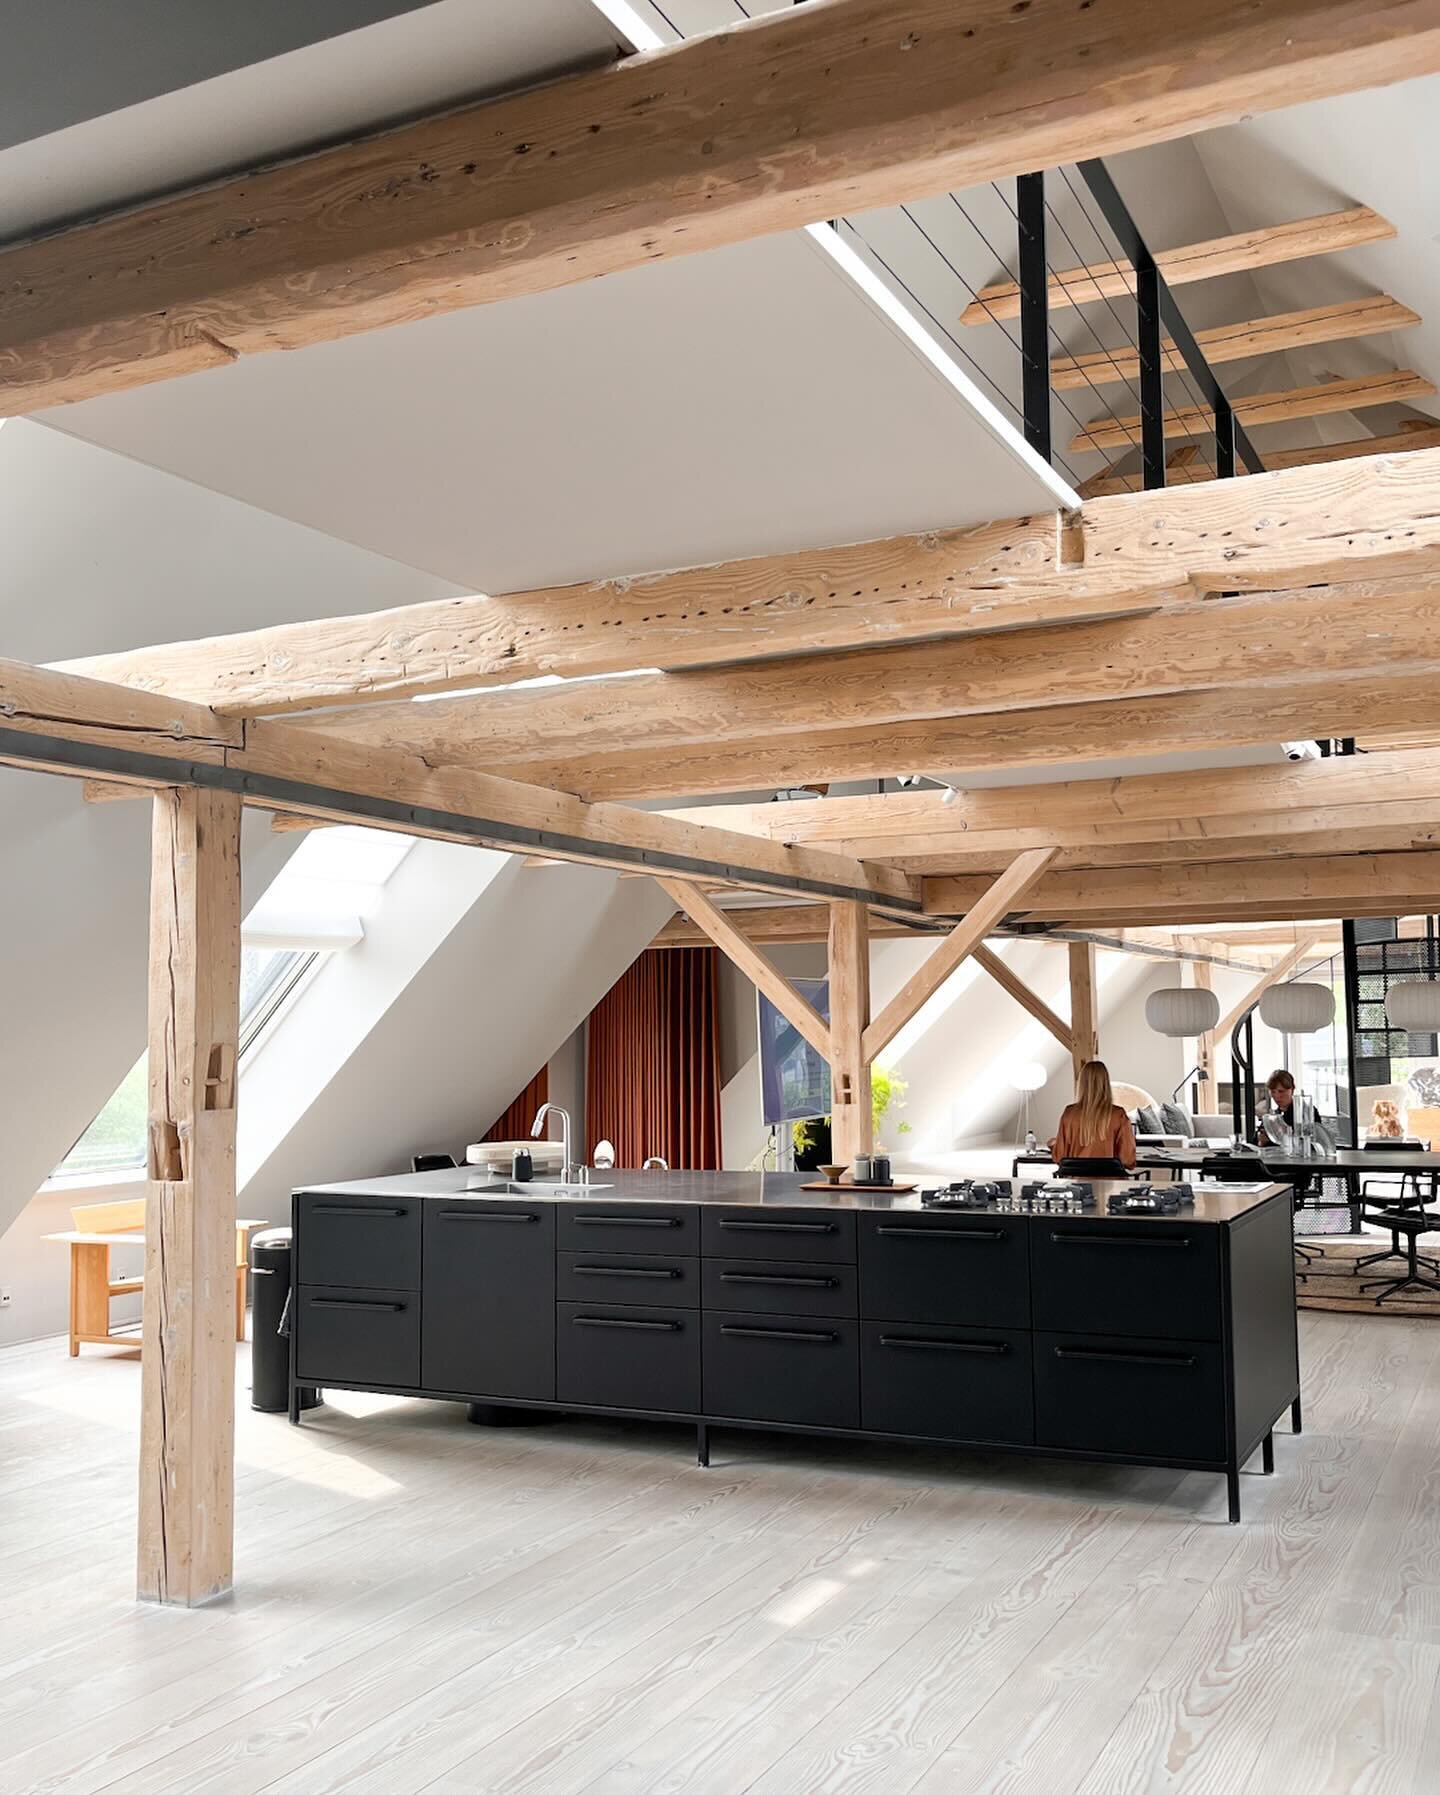 In September, we visited Vipp Headquarters in Copenhagen and toured the calm and cool lifestyle of the Vipp Loft and Vipp Supper Club.

We look forward to installing a Vipp kitchen at our project at 7 Calonne Road, Wimbledon, in January 2024.

#jason